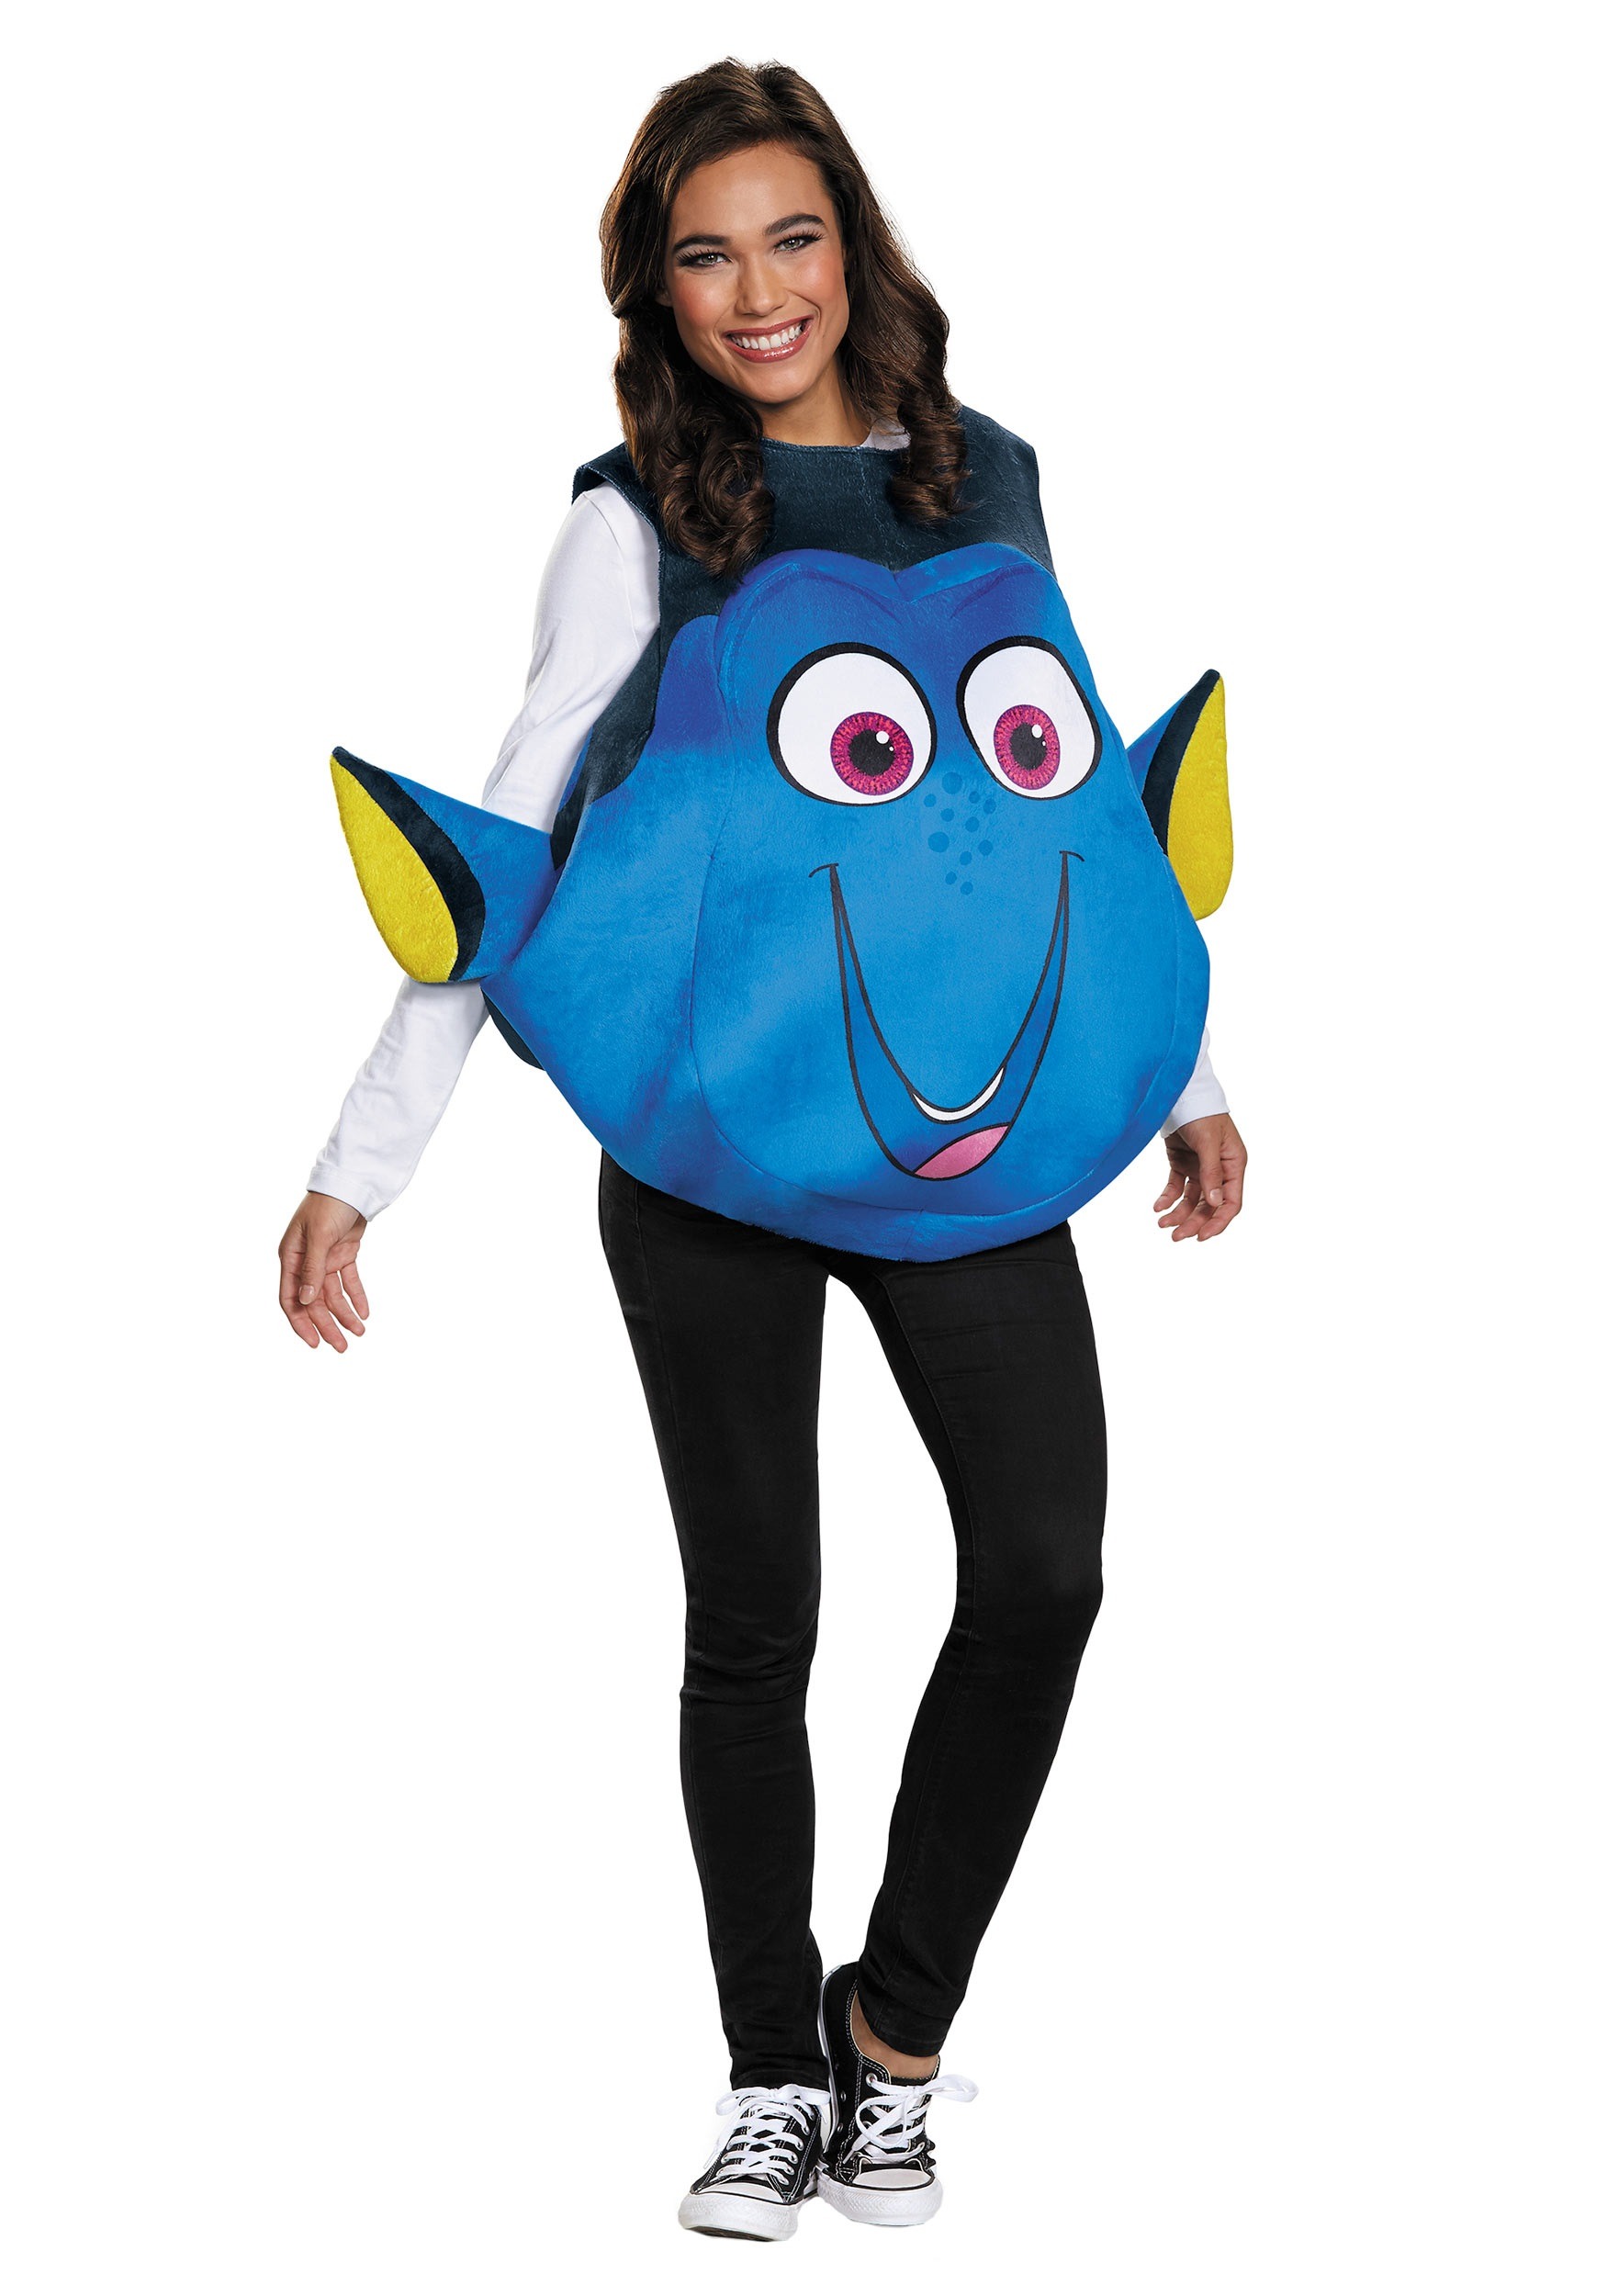 Photos - Fancy Dress Disguise Dory Fish Costume from Finding Dory for Adults Blue DI10087